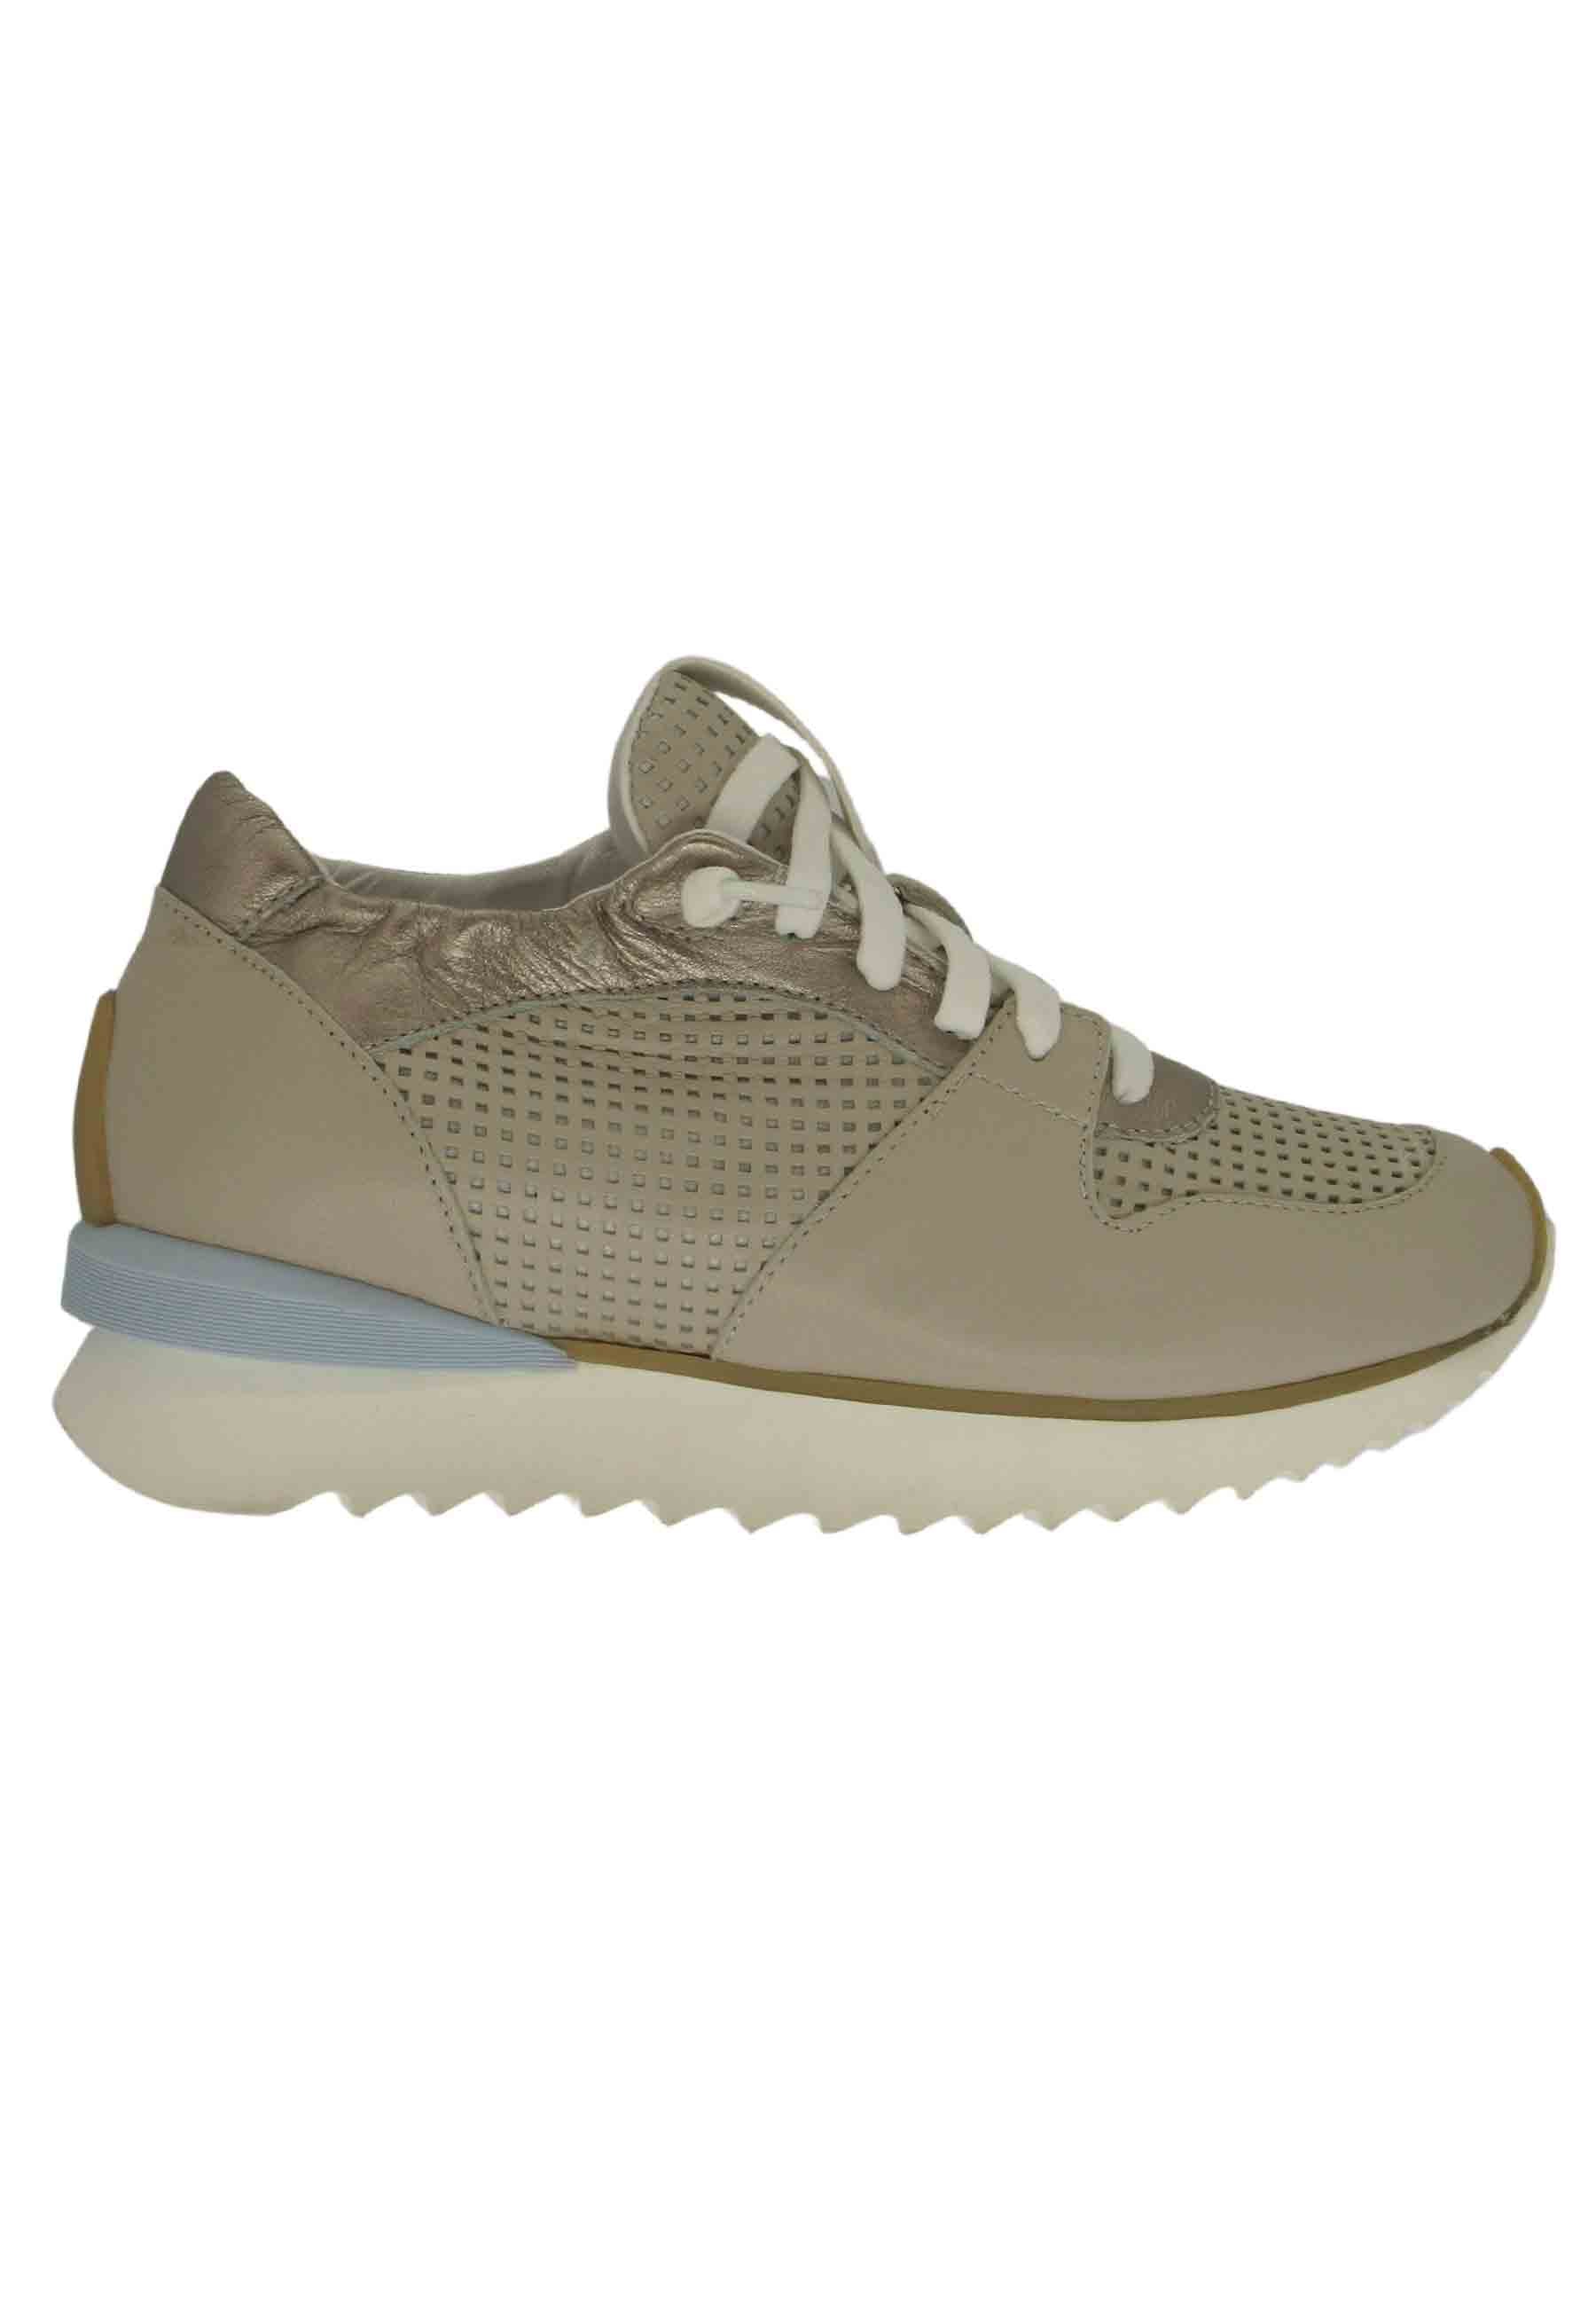 Women's sneakers in taupe leather with high rubber sole